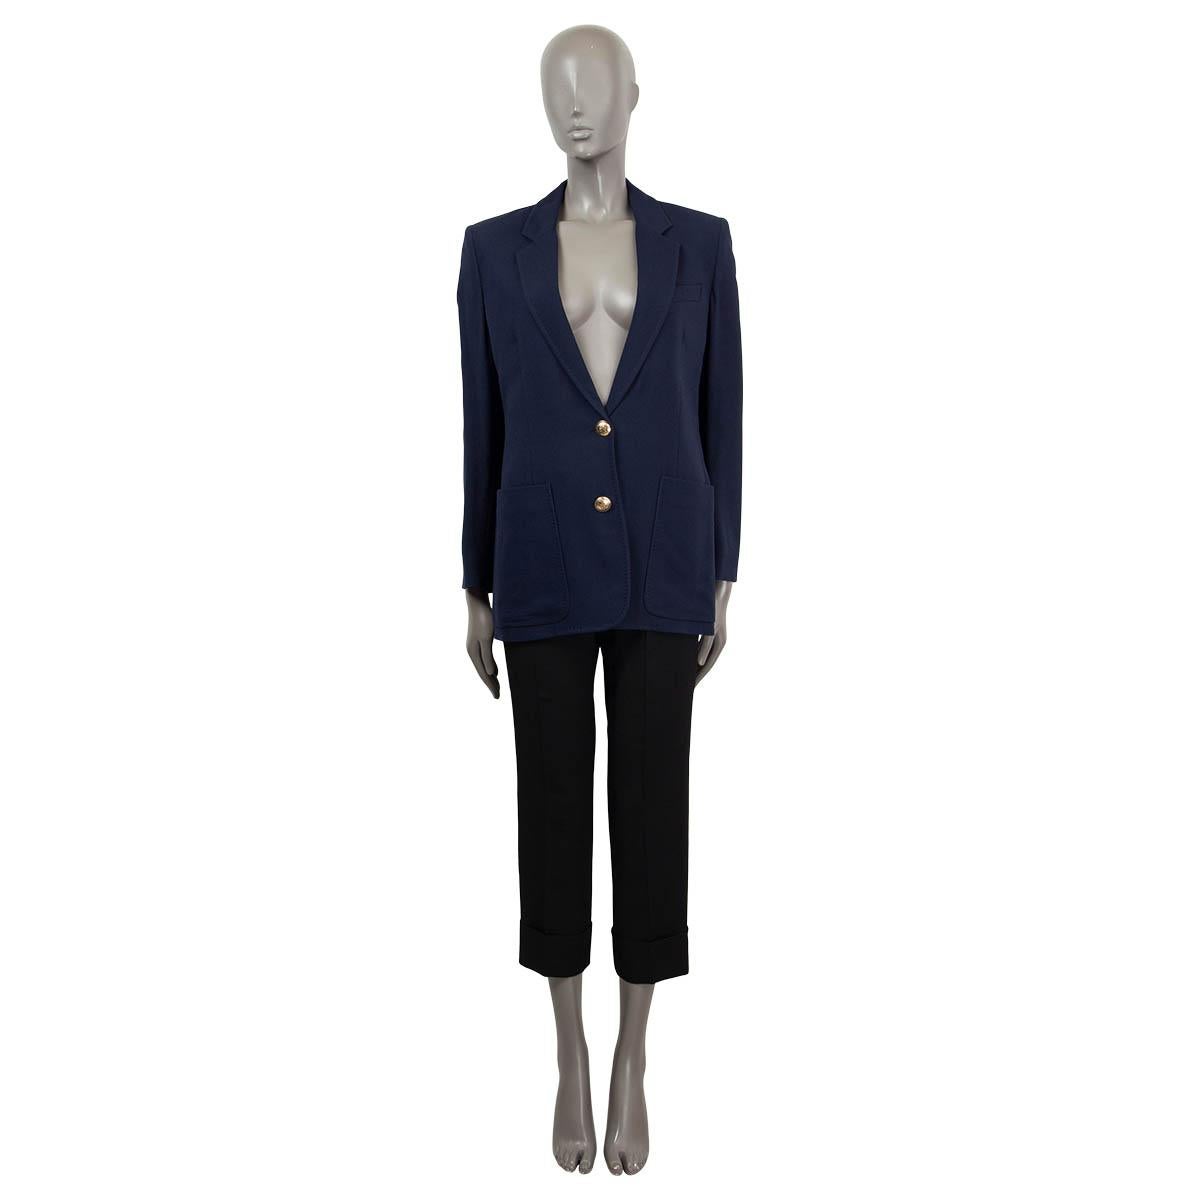 100% authentic Emilio Pucci blazer in navy blue viscose crepe (with 3% elastane). Features patch pockets and a peak lapel. Closes with two gold-tone buttons on the front and is partially lined in viscose (100%). Brand new - comes with spare